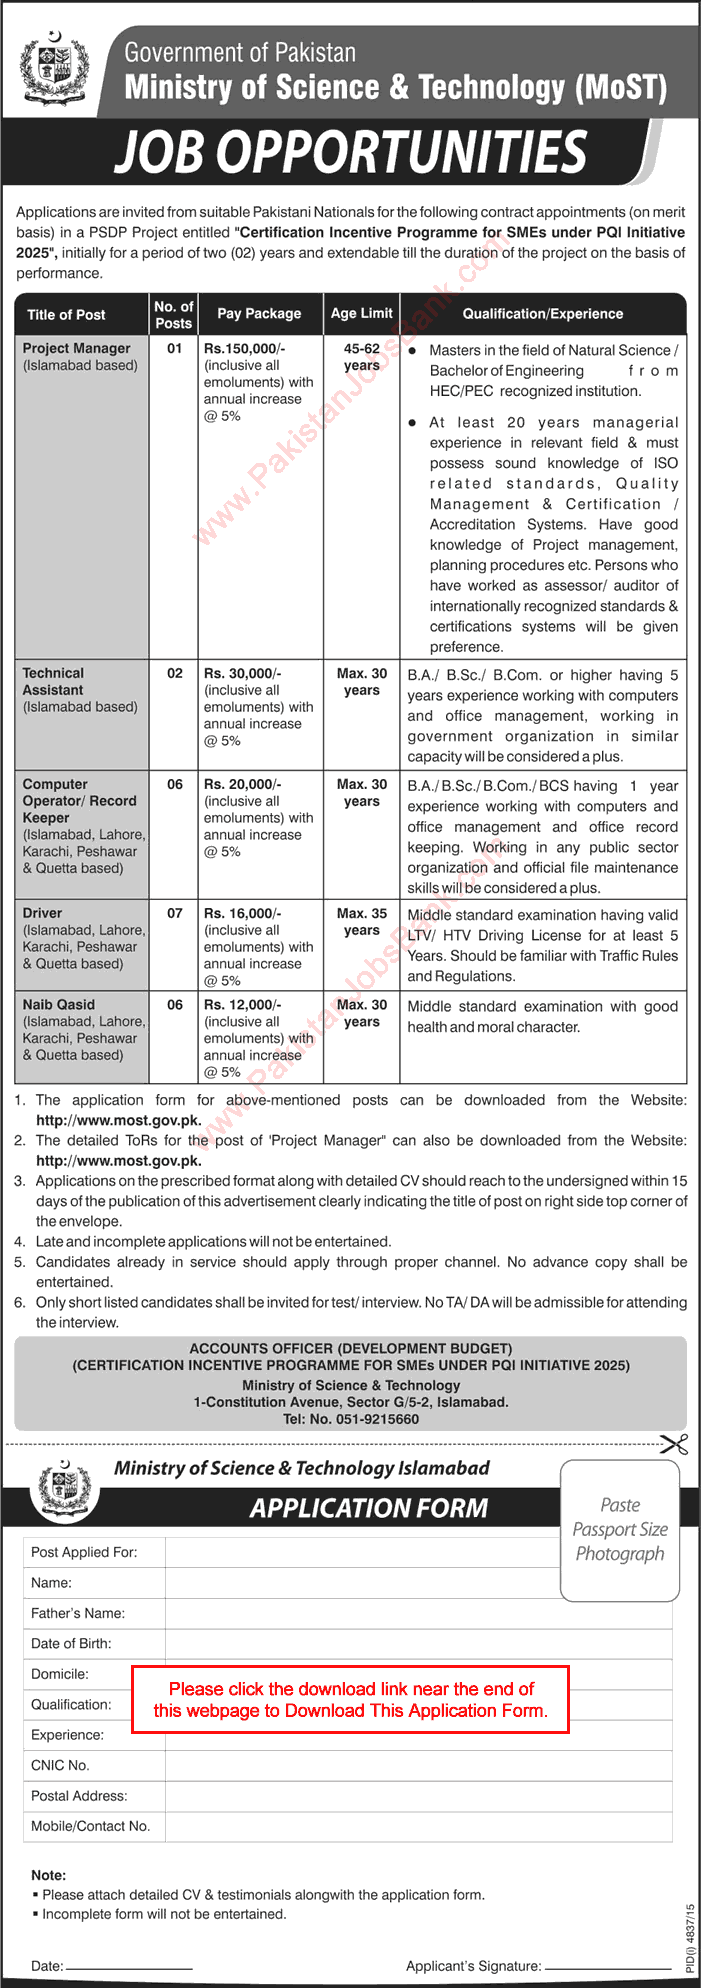 Ministry of Science and Technology Pakistan Jobs March 2016 Application Form Download Latest